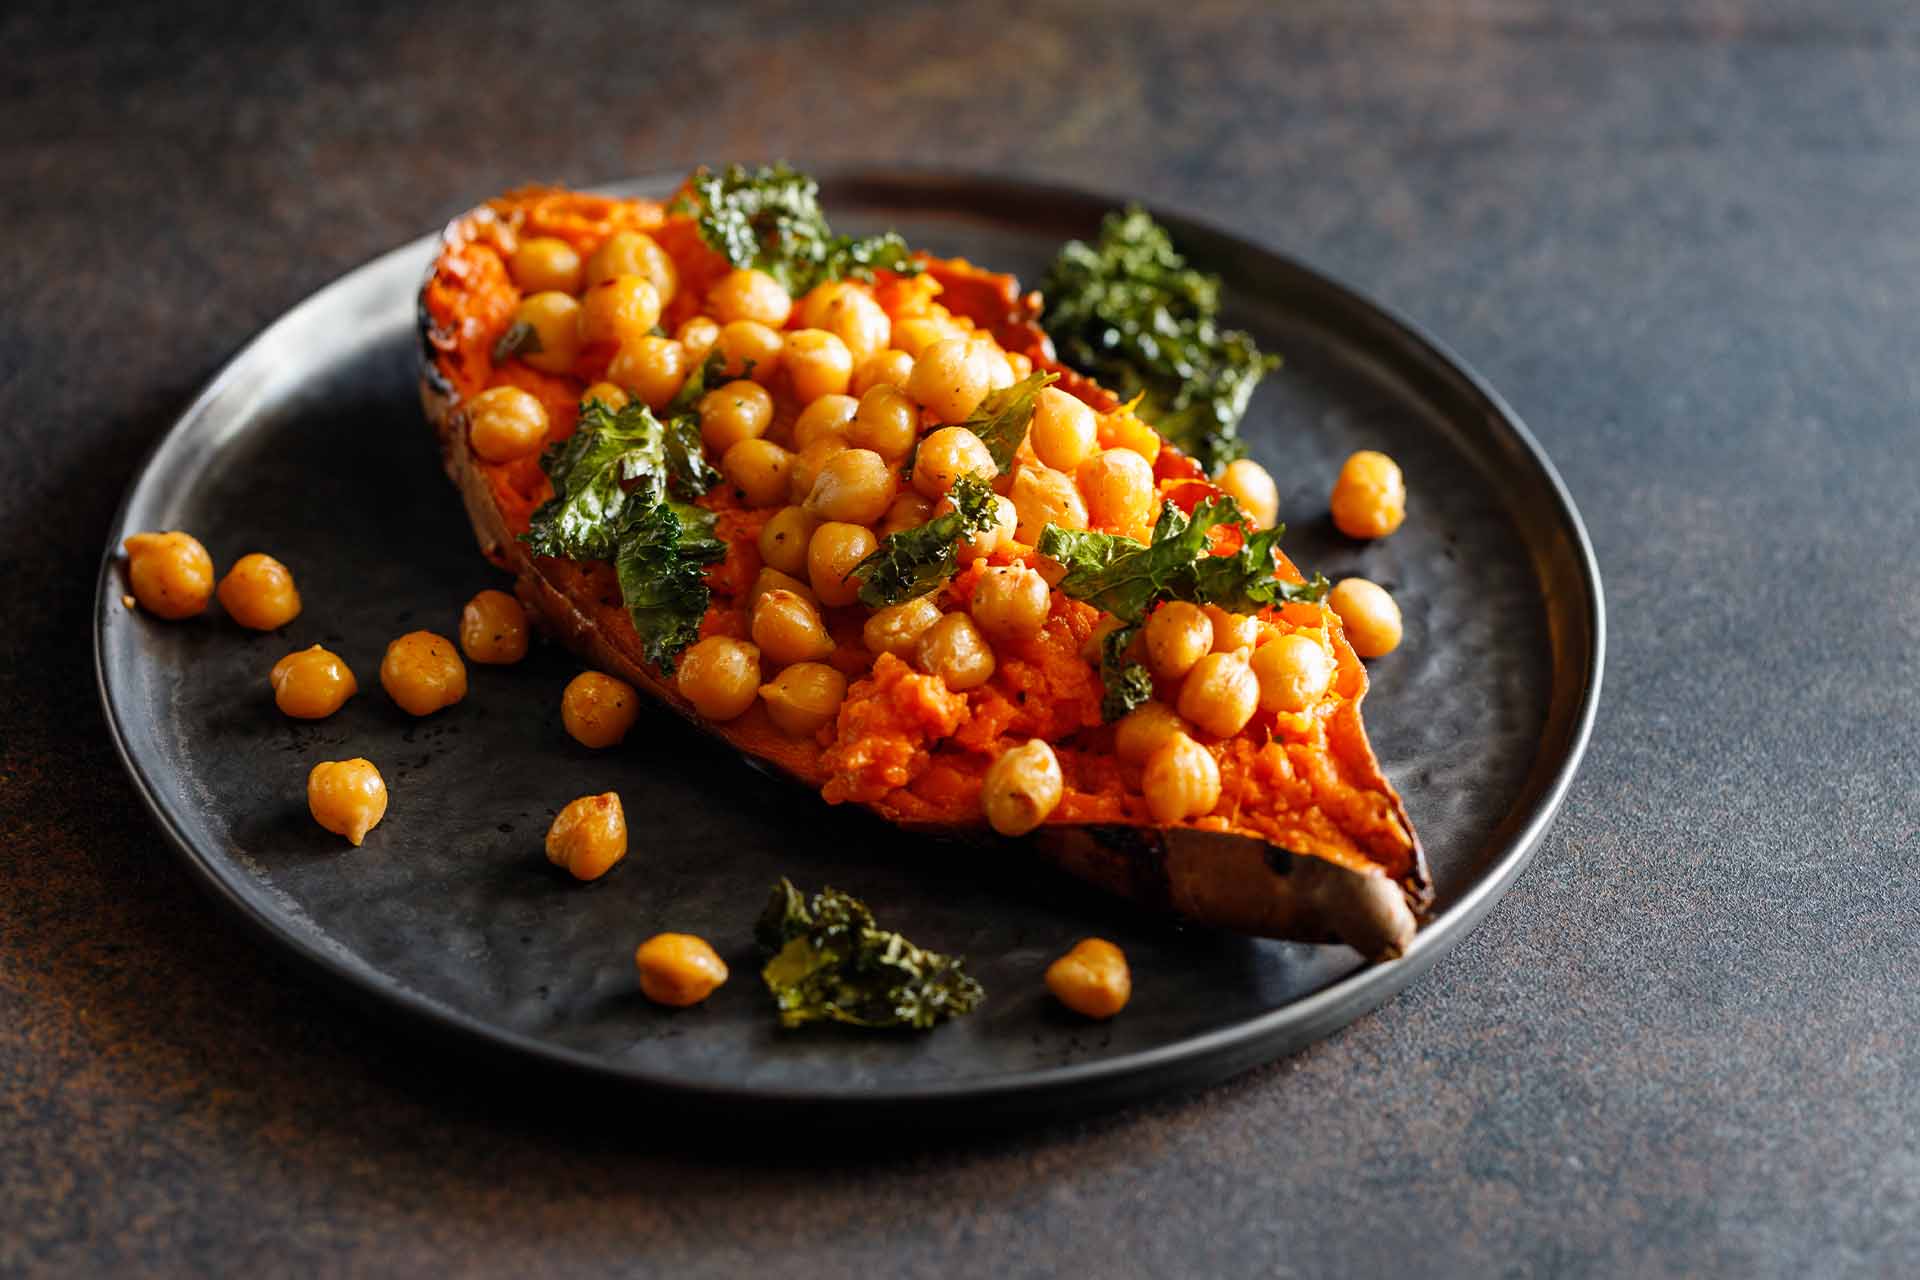 Featured image for “Roasted Chickpea Stuffed Sweet Potatoes with Tahini Sauce”